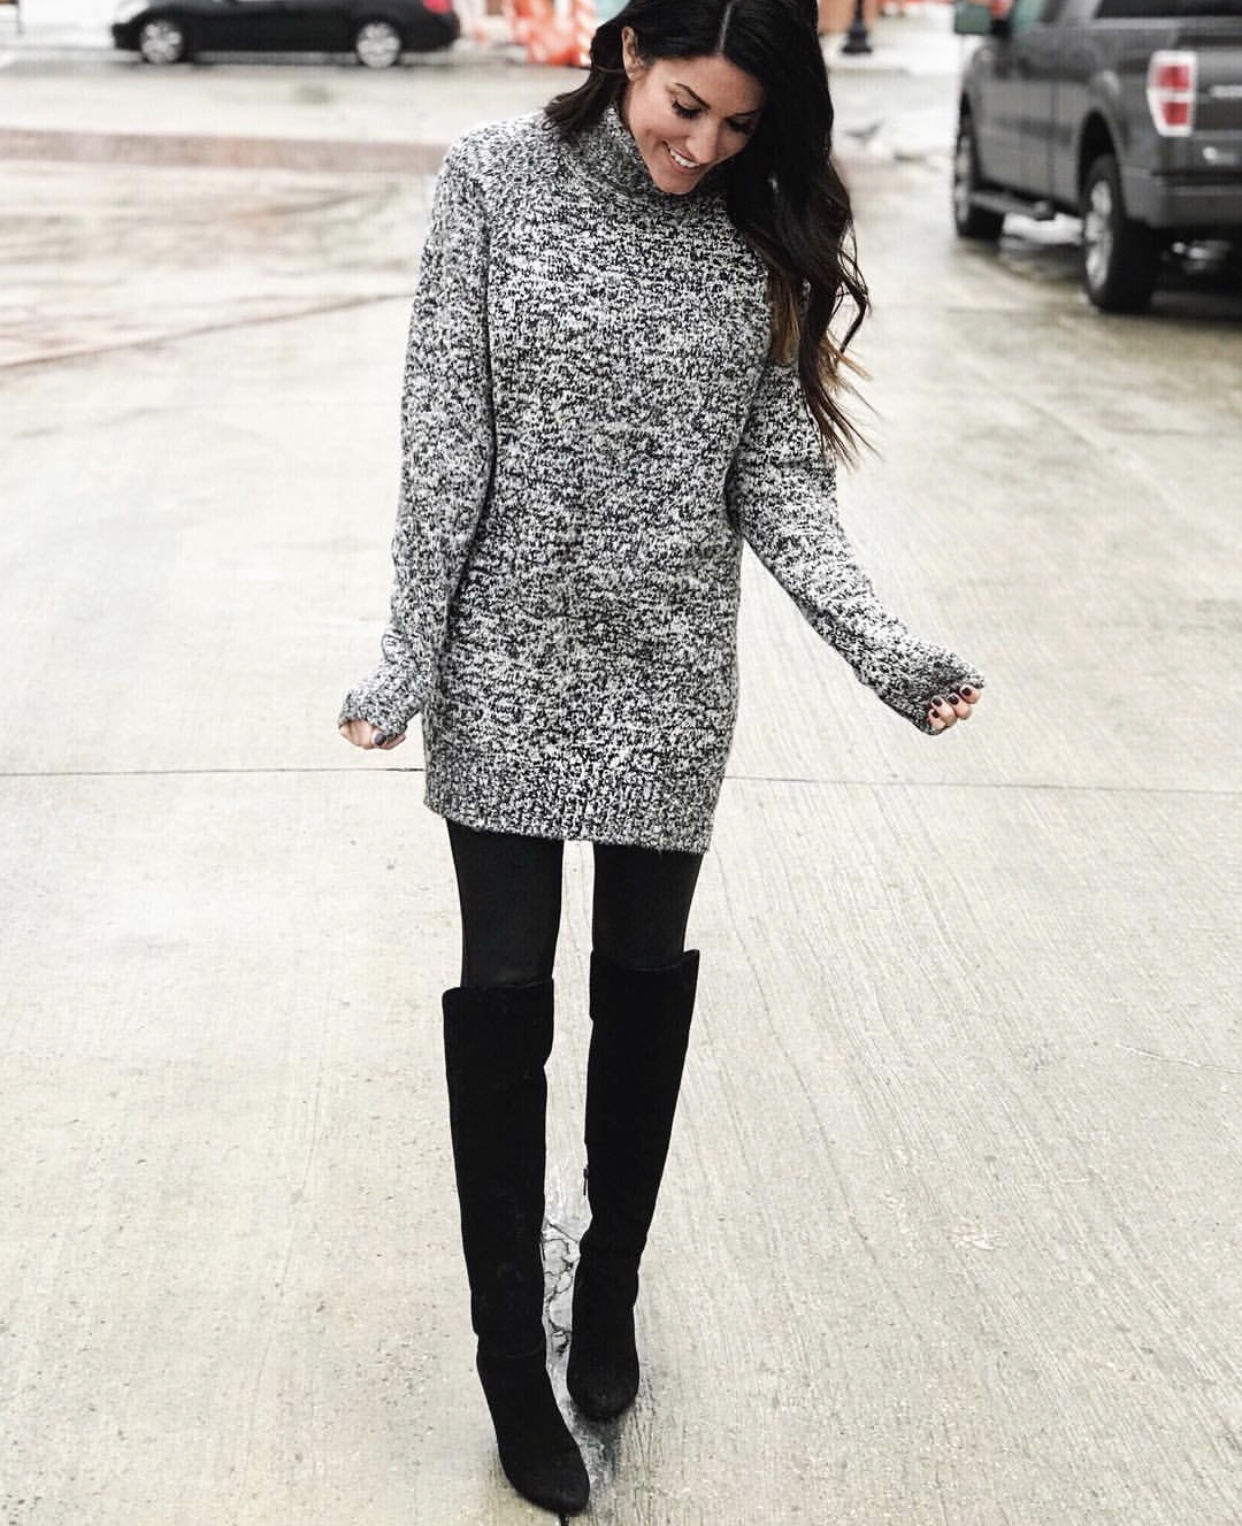 dress with leggings and booties